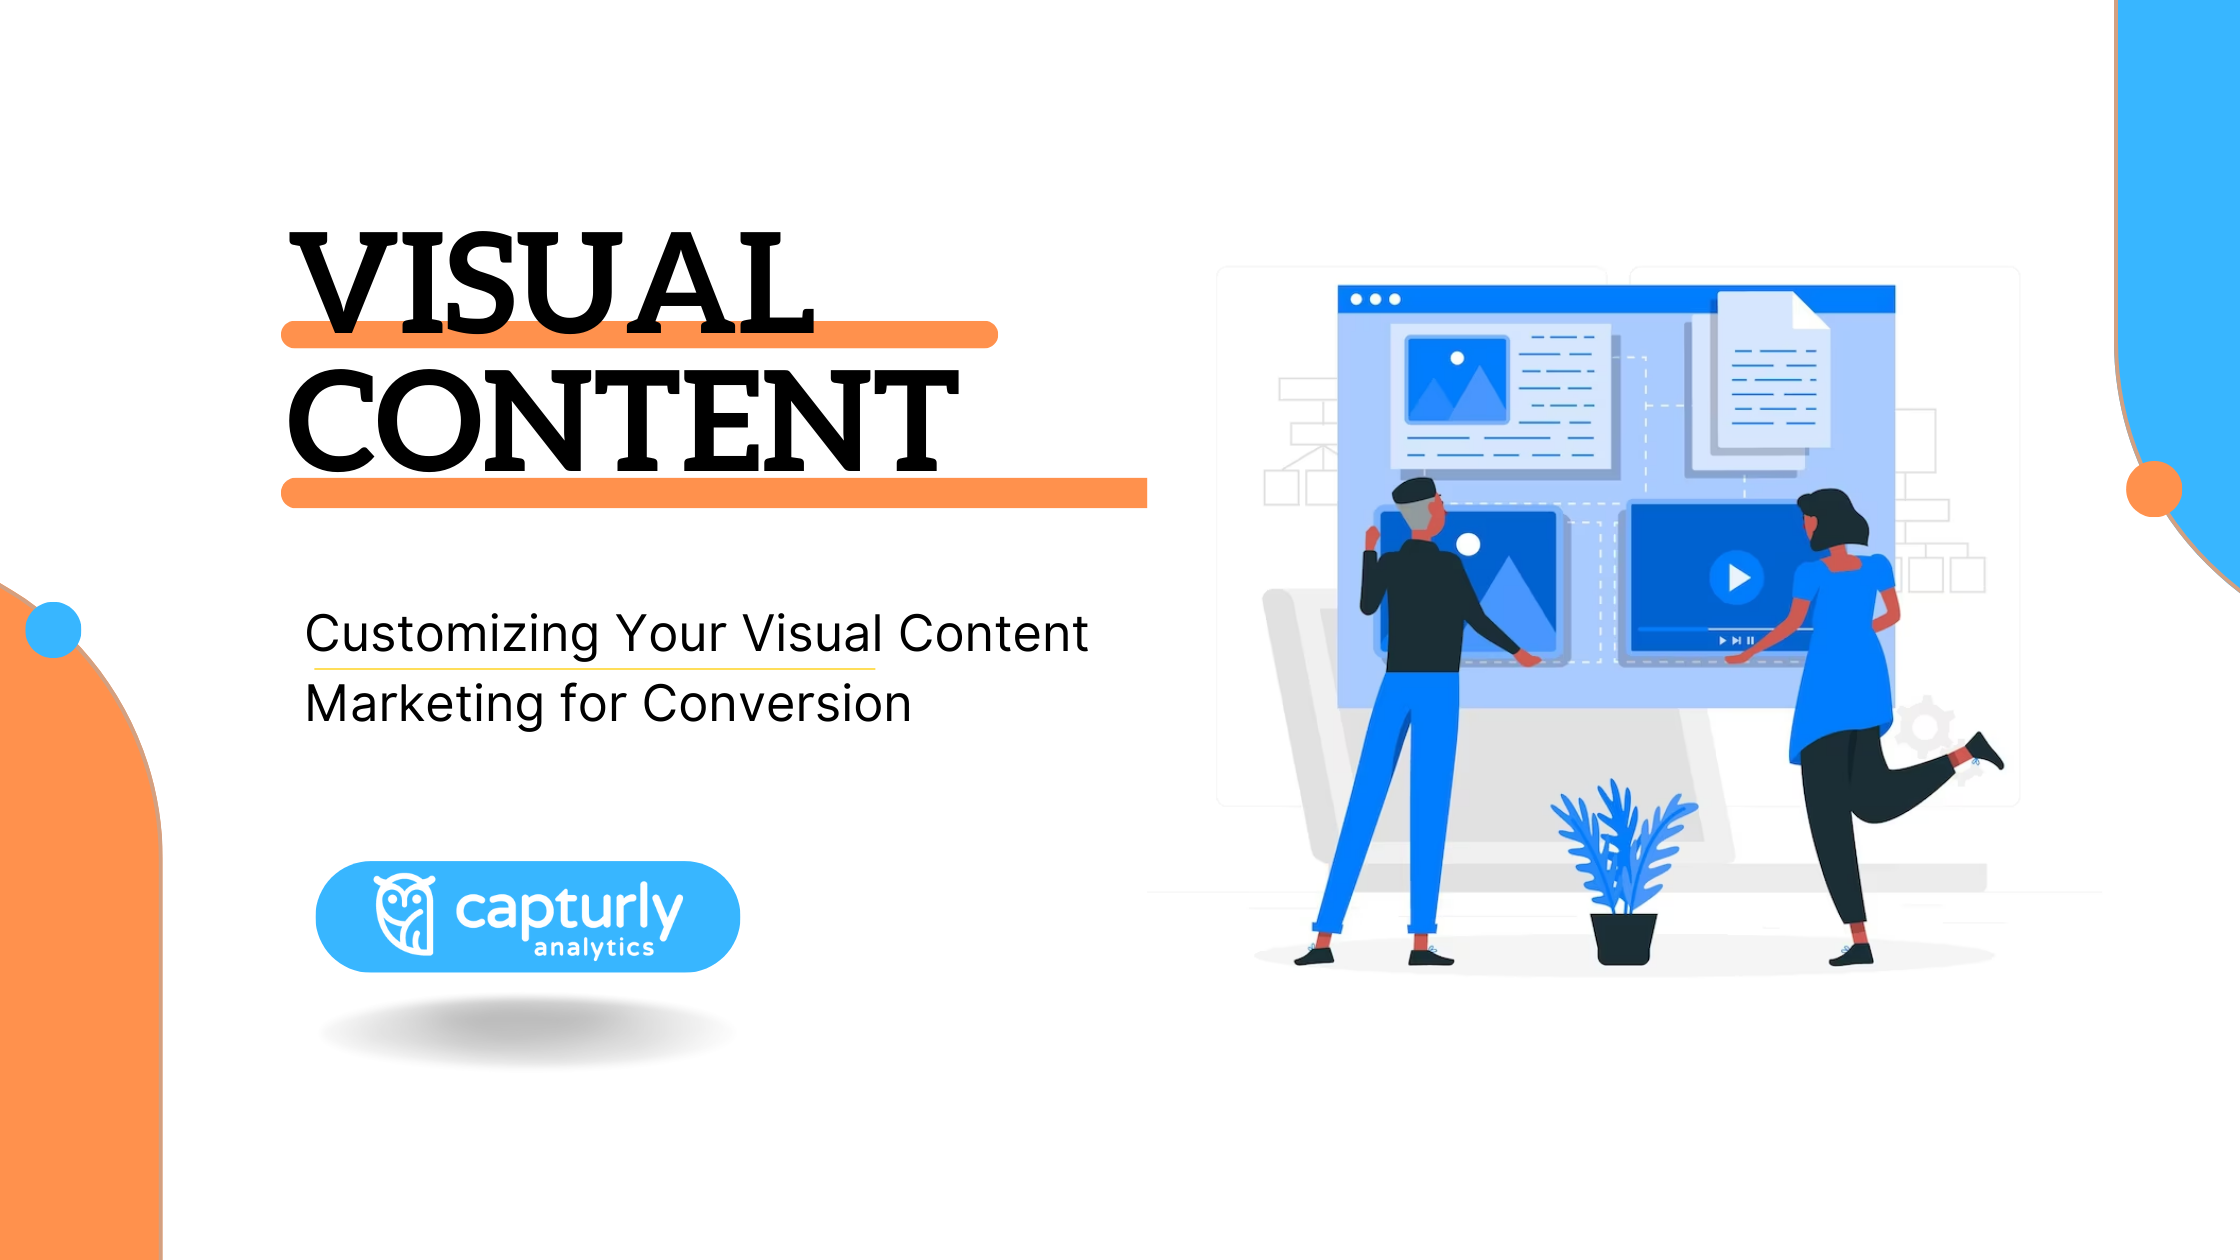 The title: Customizing Your Visual Content Marketing for Conversio. Image of people analyzing videos.